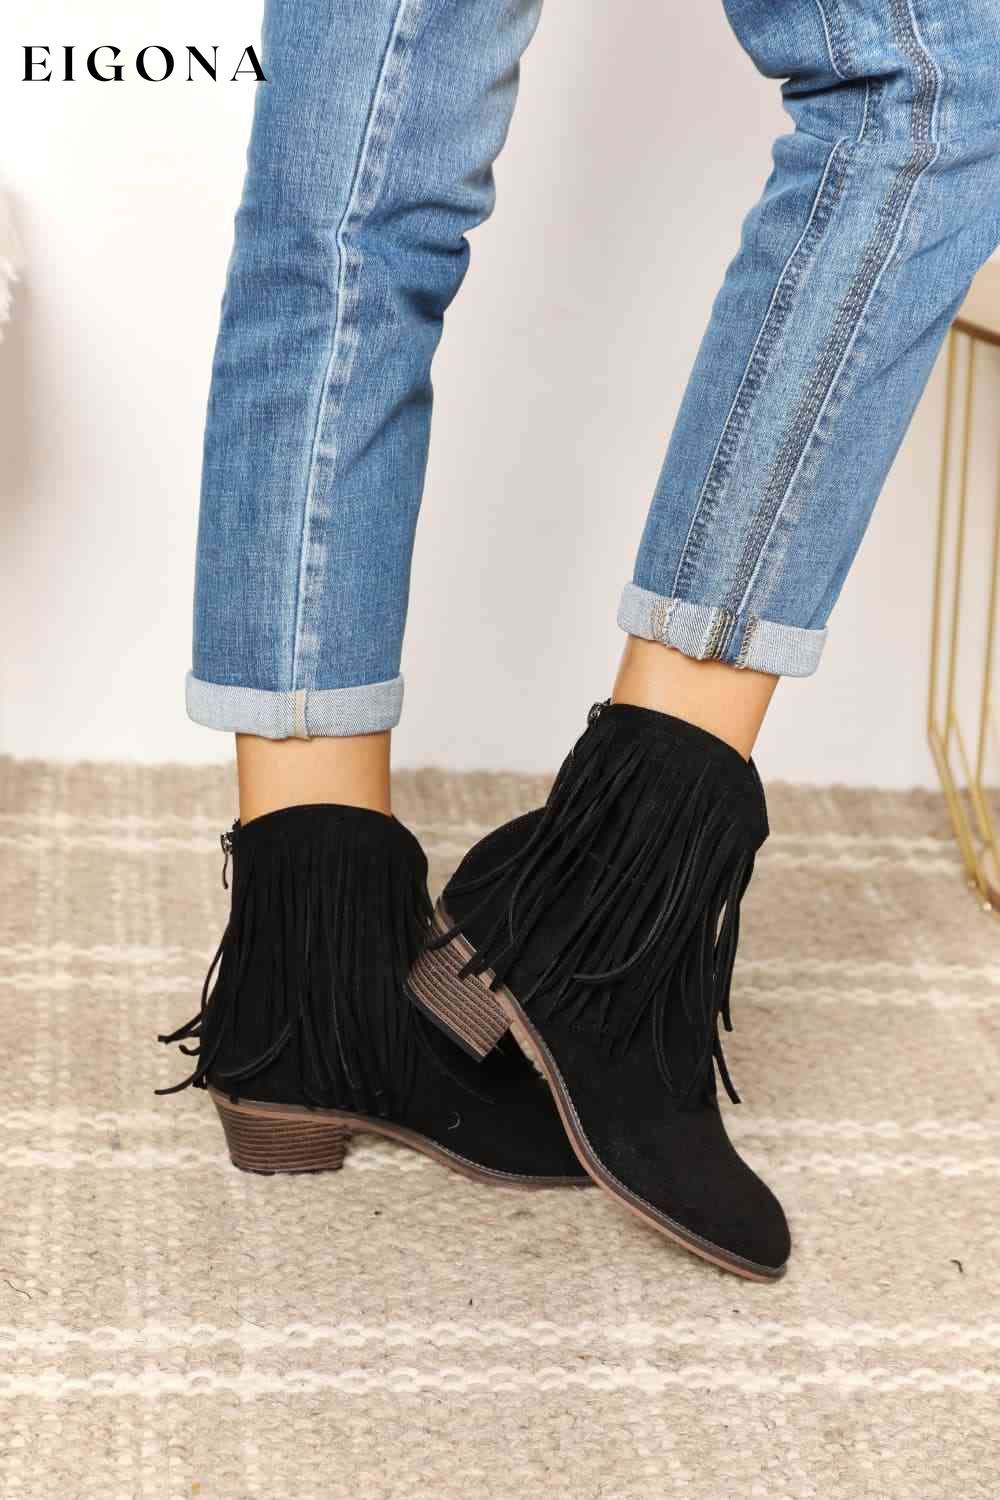 Women's Fringe Cowboy Western Ankle Boots Clothes Legend Ship from USA shoes womens shoes